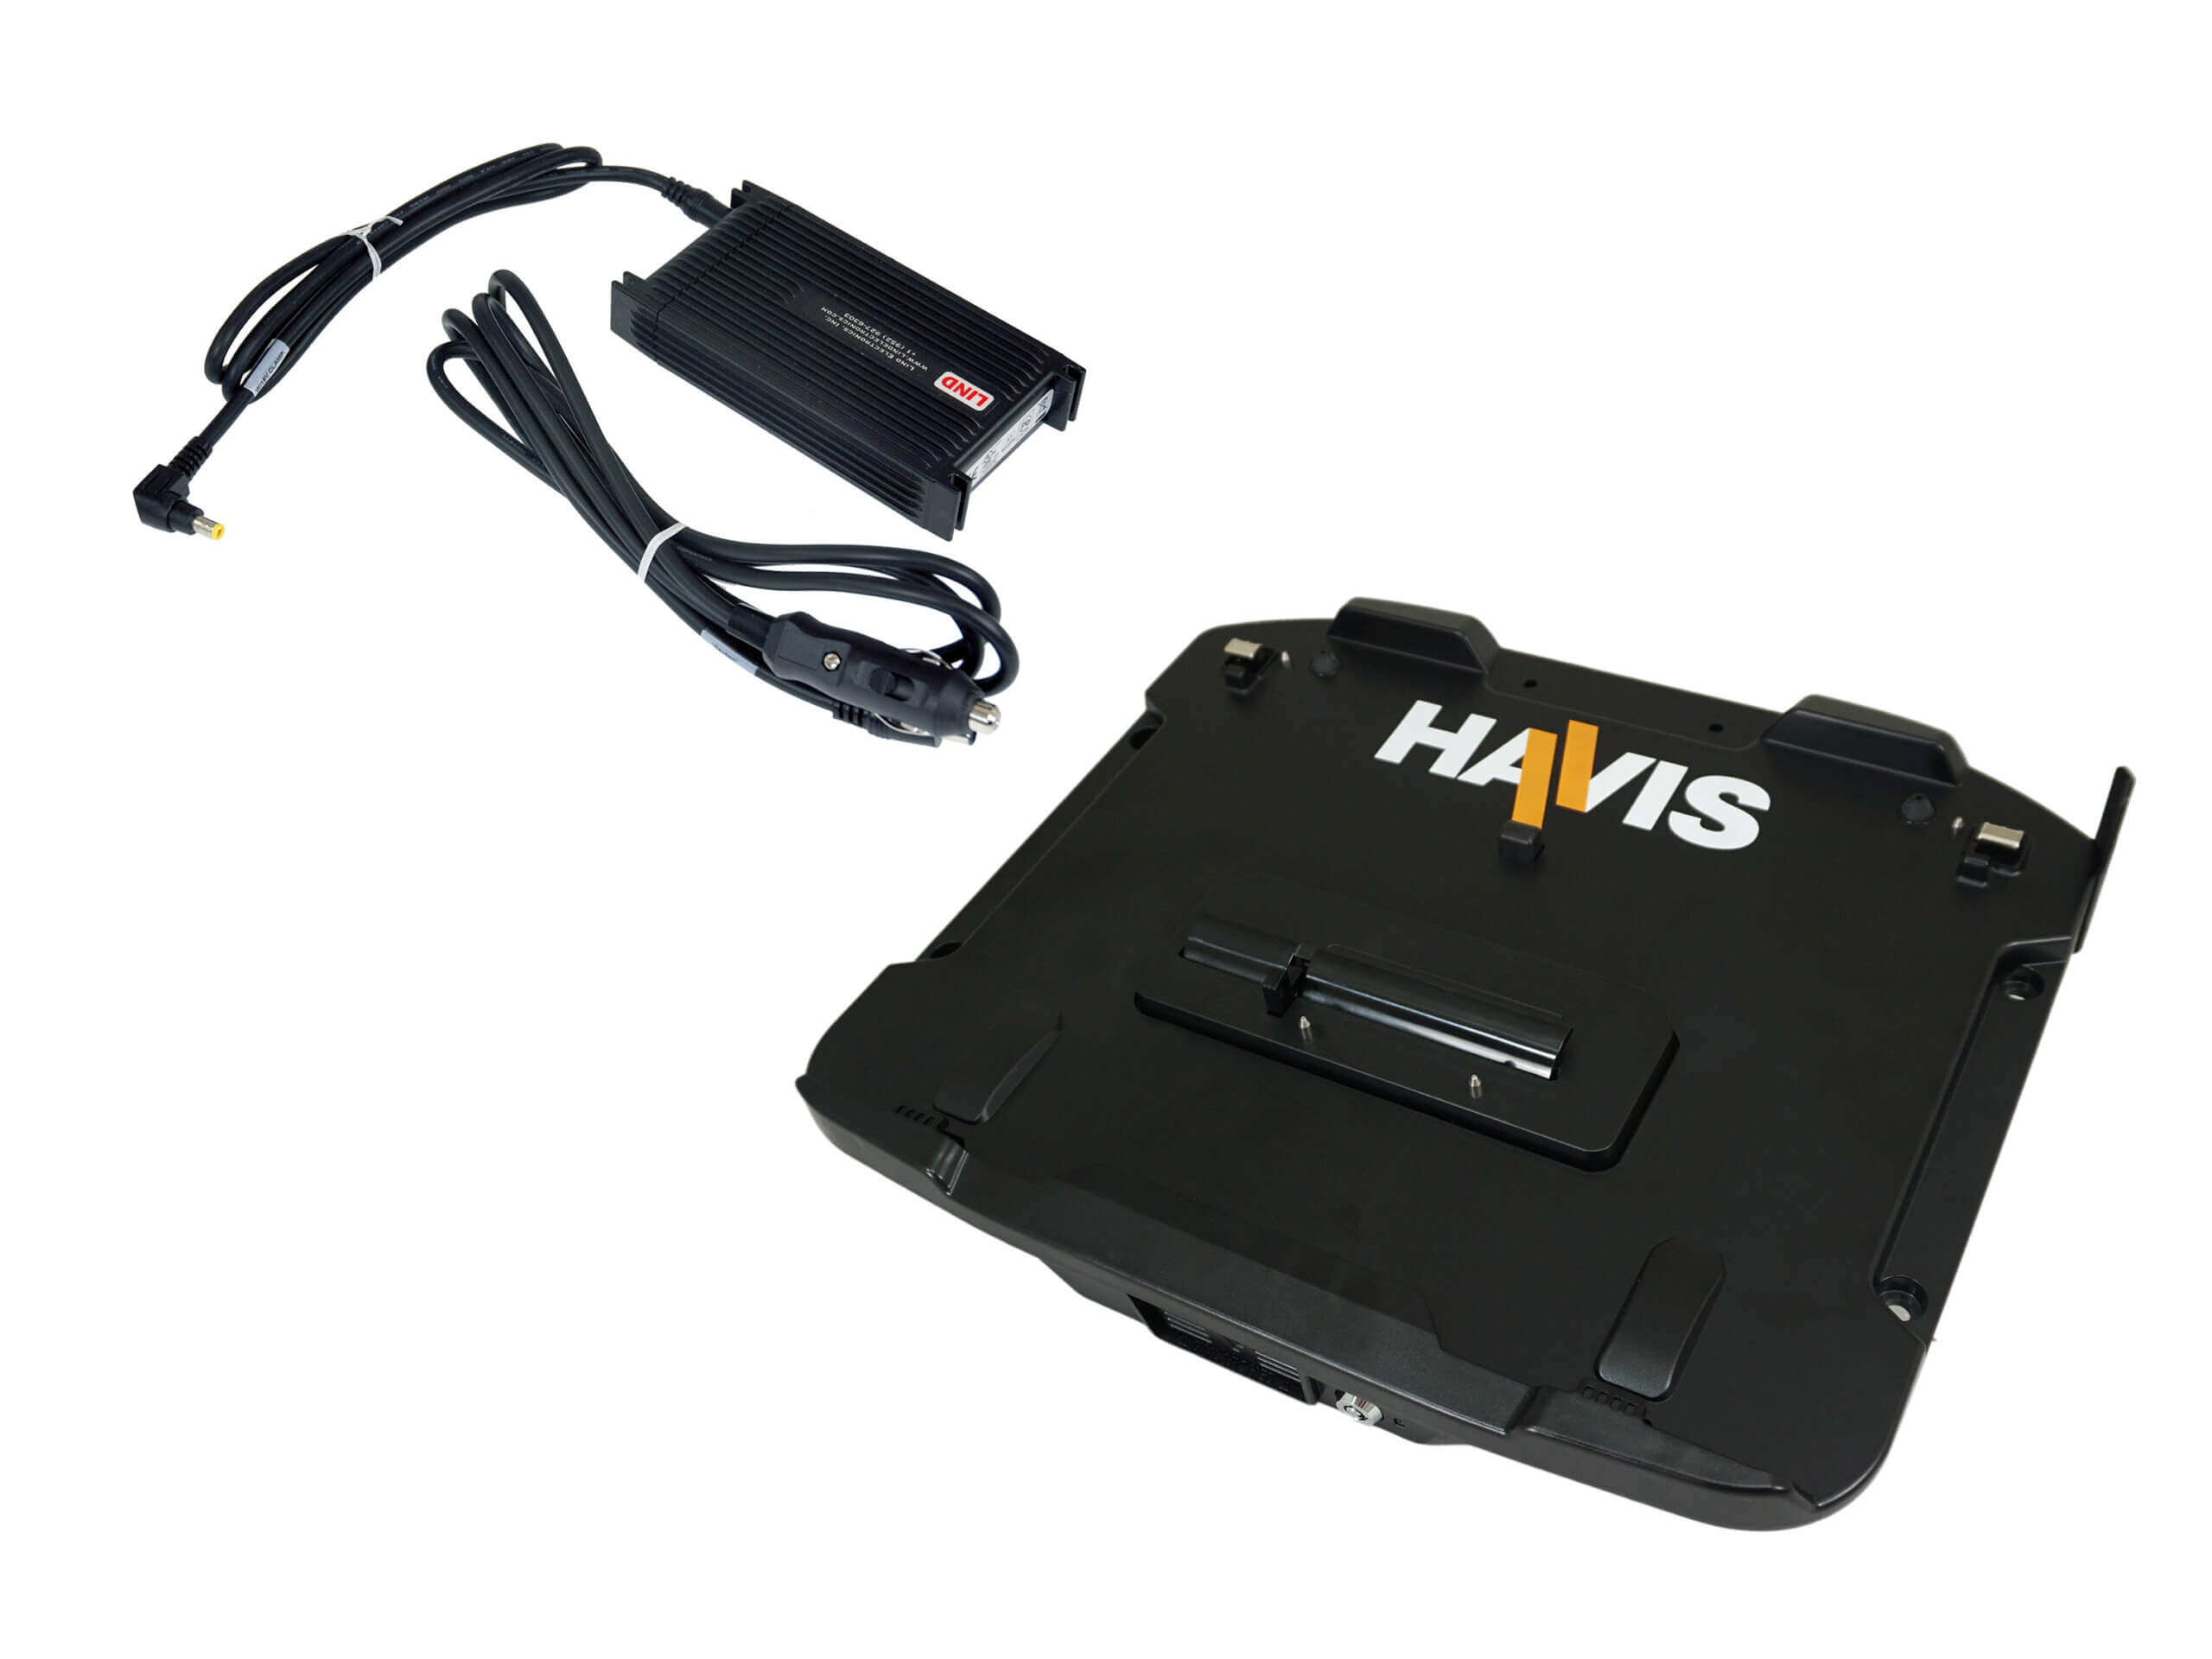 Docking Station with Standard Port Replication, Quad Pass-Thru Antenna Connection and External Power Supply for Panasonic’s TOUGHBOOK 40 Laptop